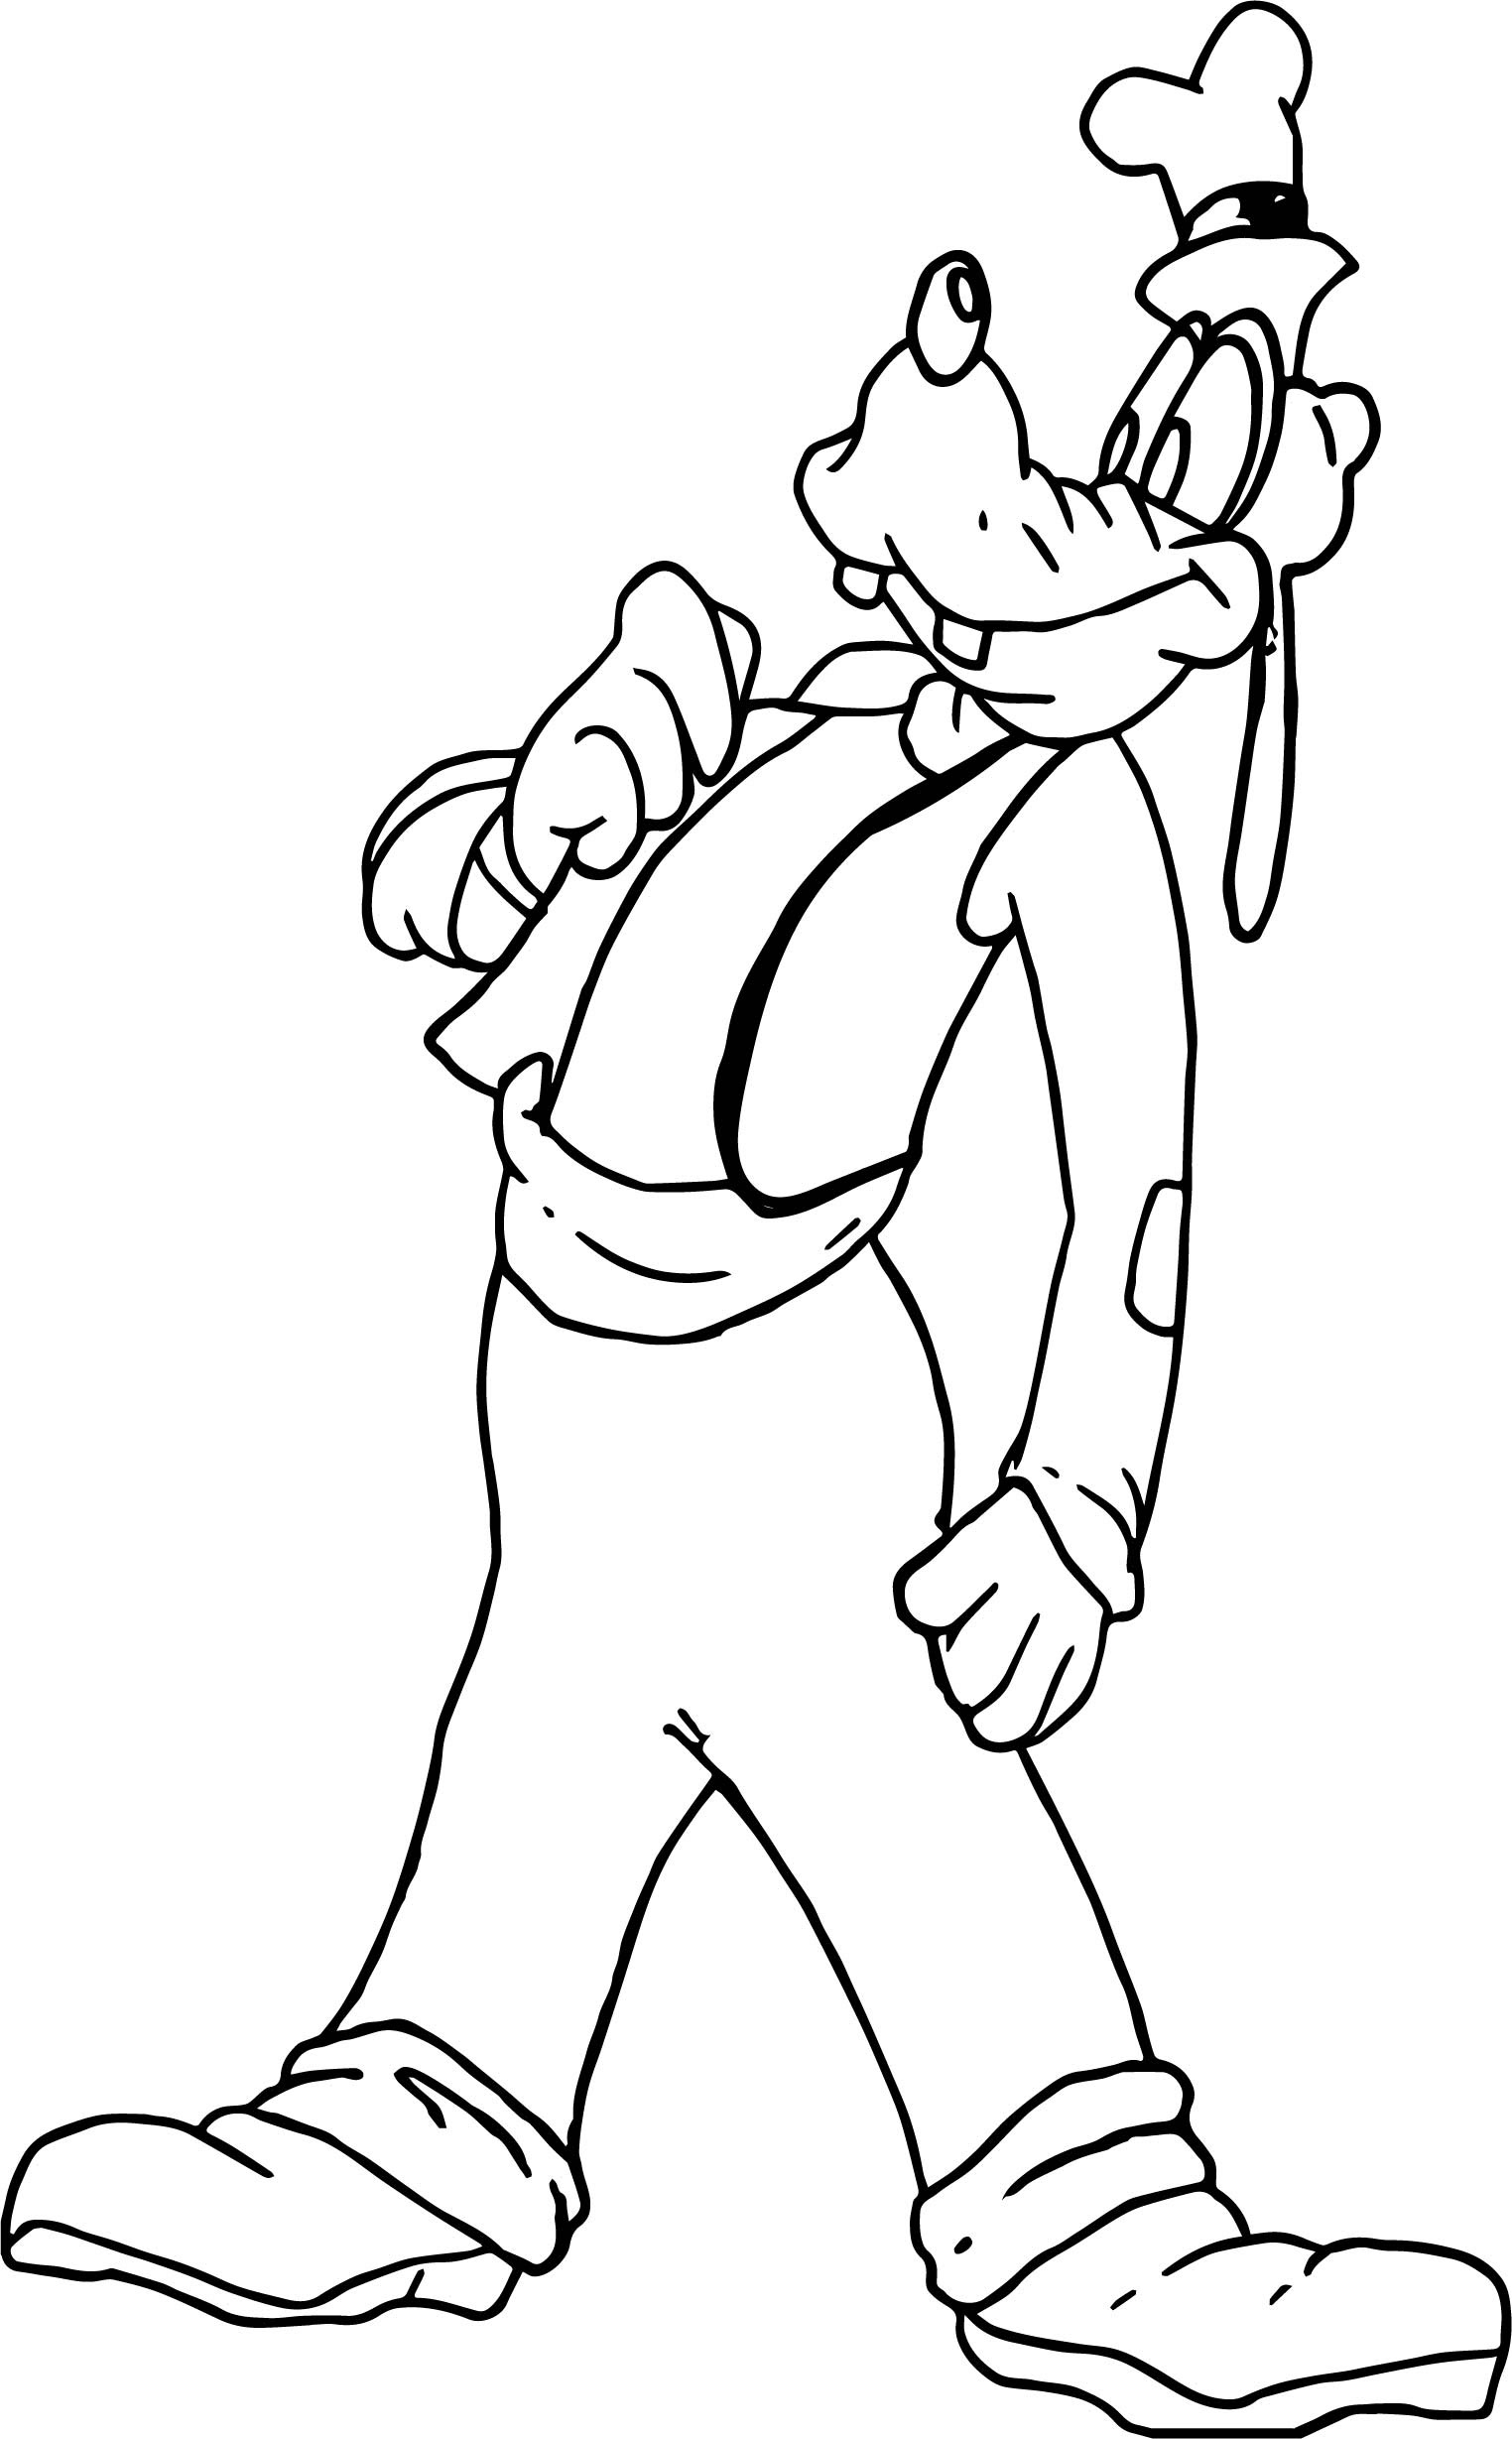 Goofy Printable Coloring Pages - Printable Templates